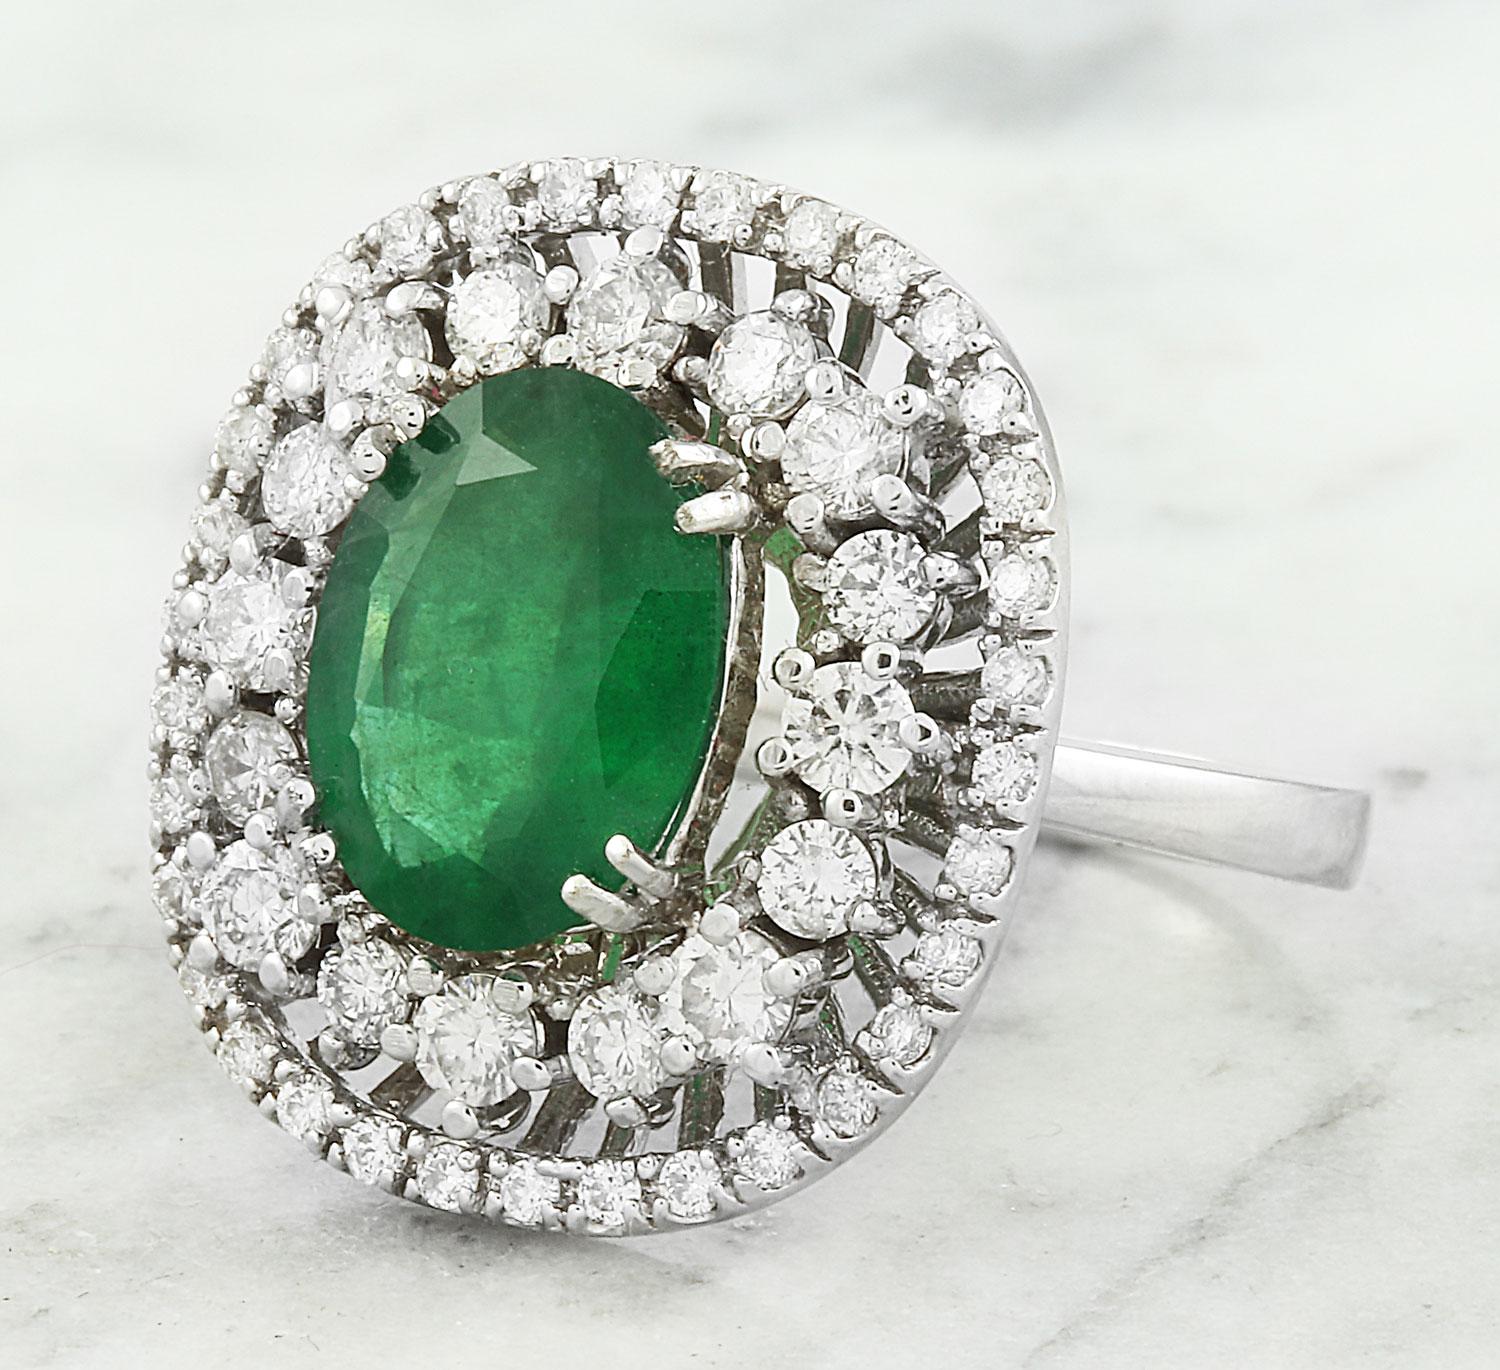 Introducing our exquisite 14K Solid White Gold Diamond Ring featuring a captivating 2.53 Carat Natural Emerald, measuring 11.00x9.00 millimeters. This meticulously crafted ring is adorned with a shimmering 1.20 carat diamond, boasting F-G color and